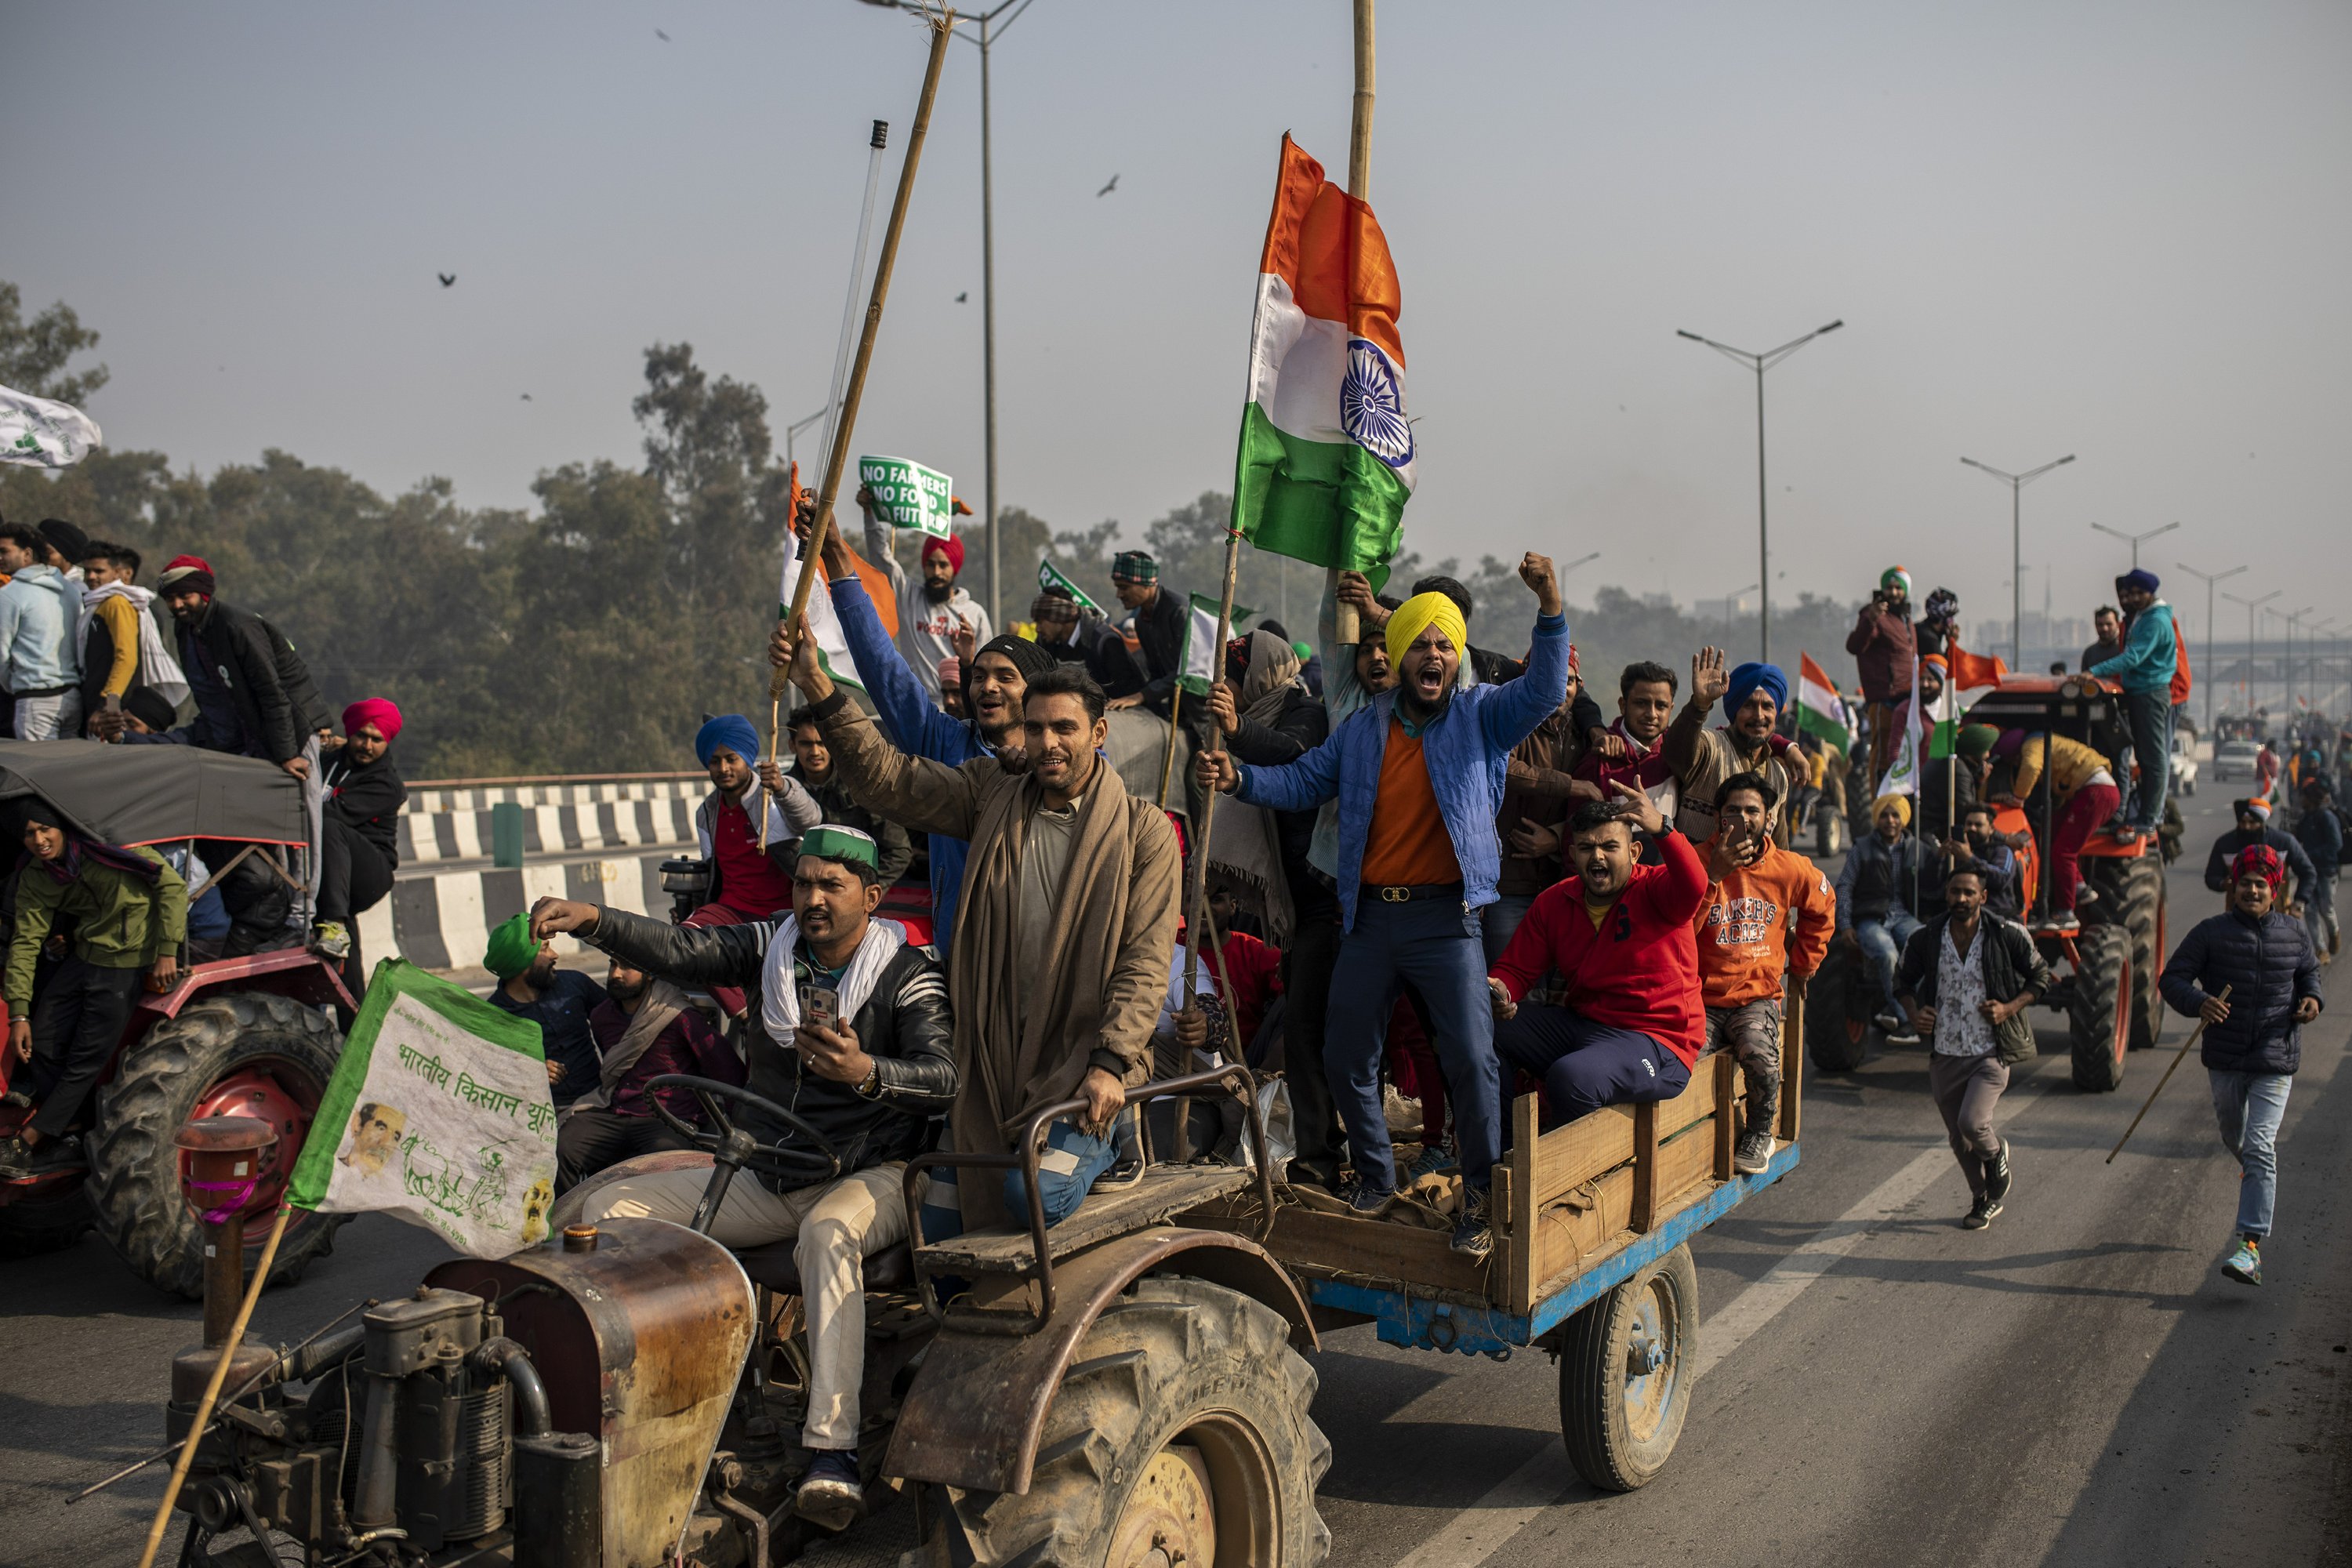 Agricultural protests in India resonate in US agriculture